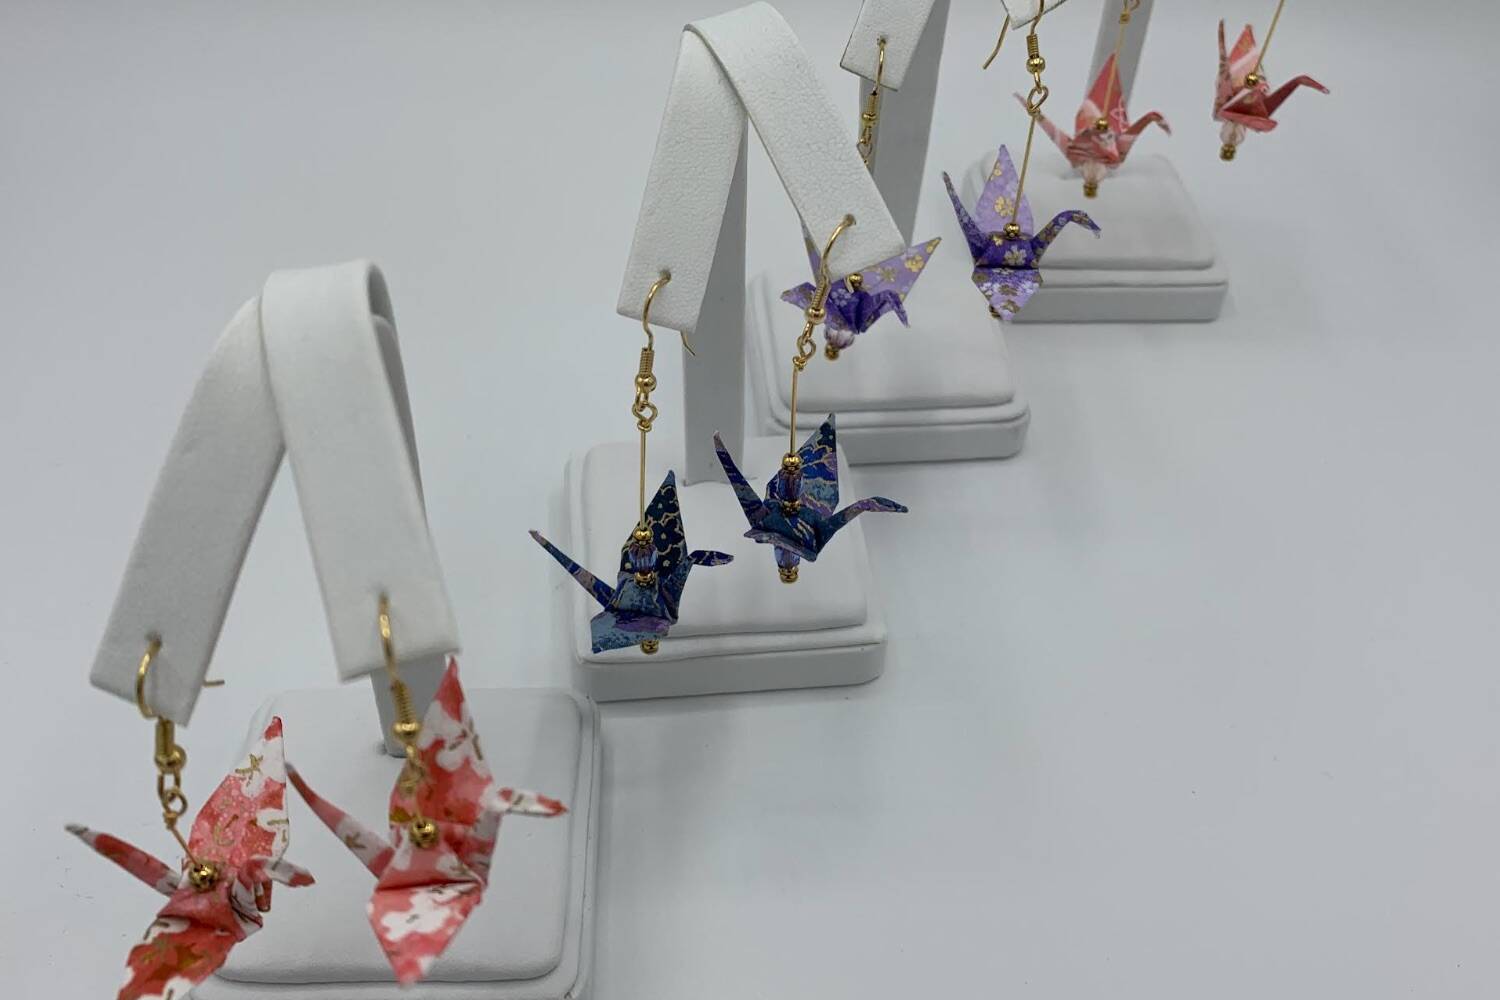 Washi Origami Crane earrings made by Fay Lim of Casion Jewelry